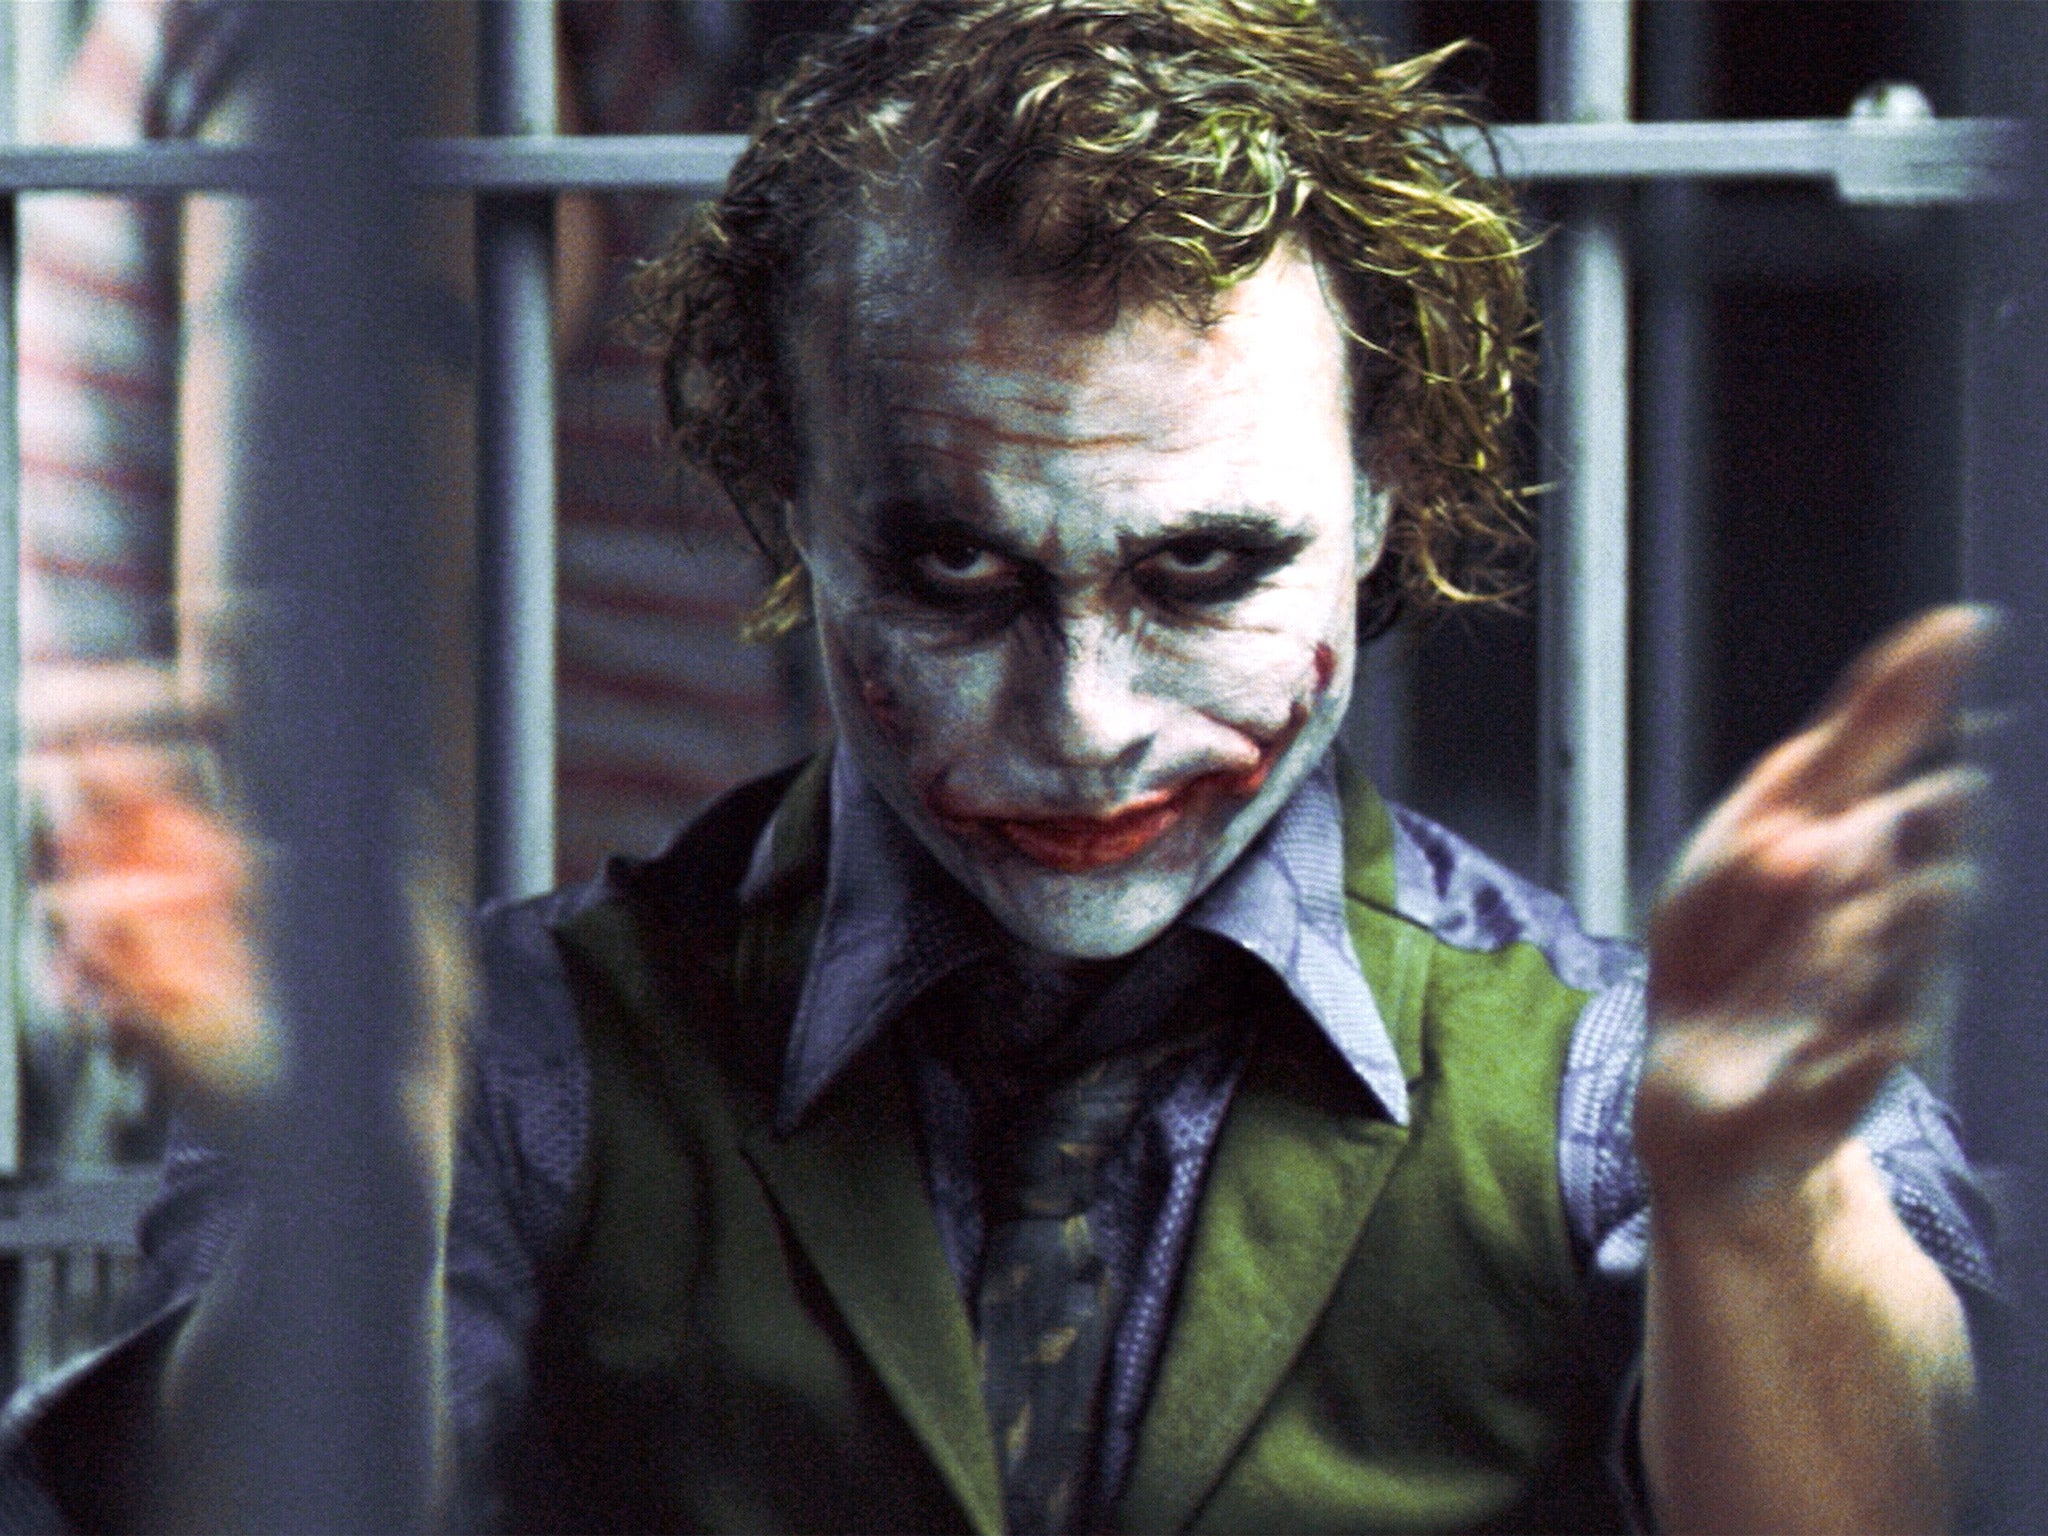 Christopher Nolan's Batman series (Heath Ledger's Joker, pictured) features dark themes and characters that are not aimed at children